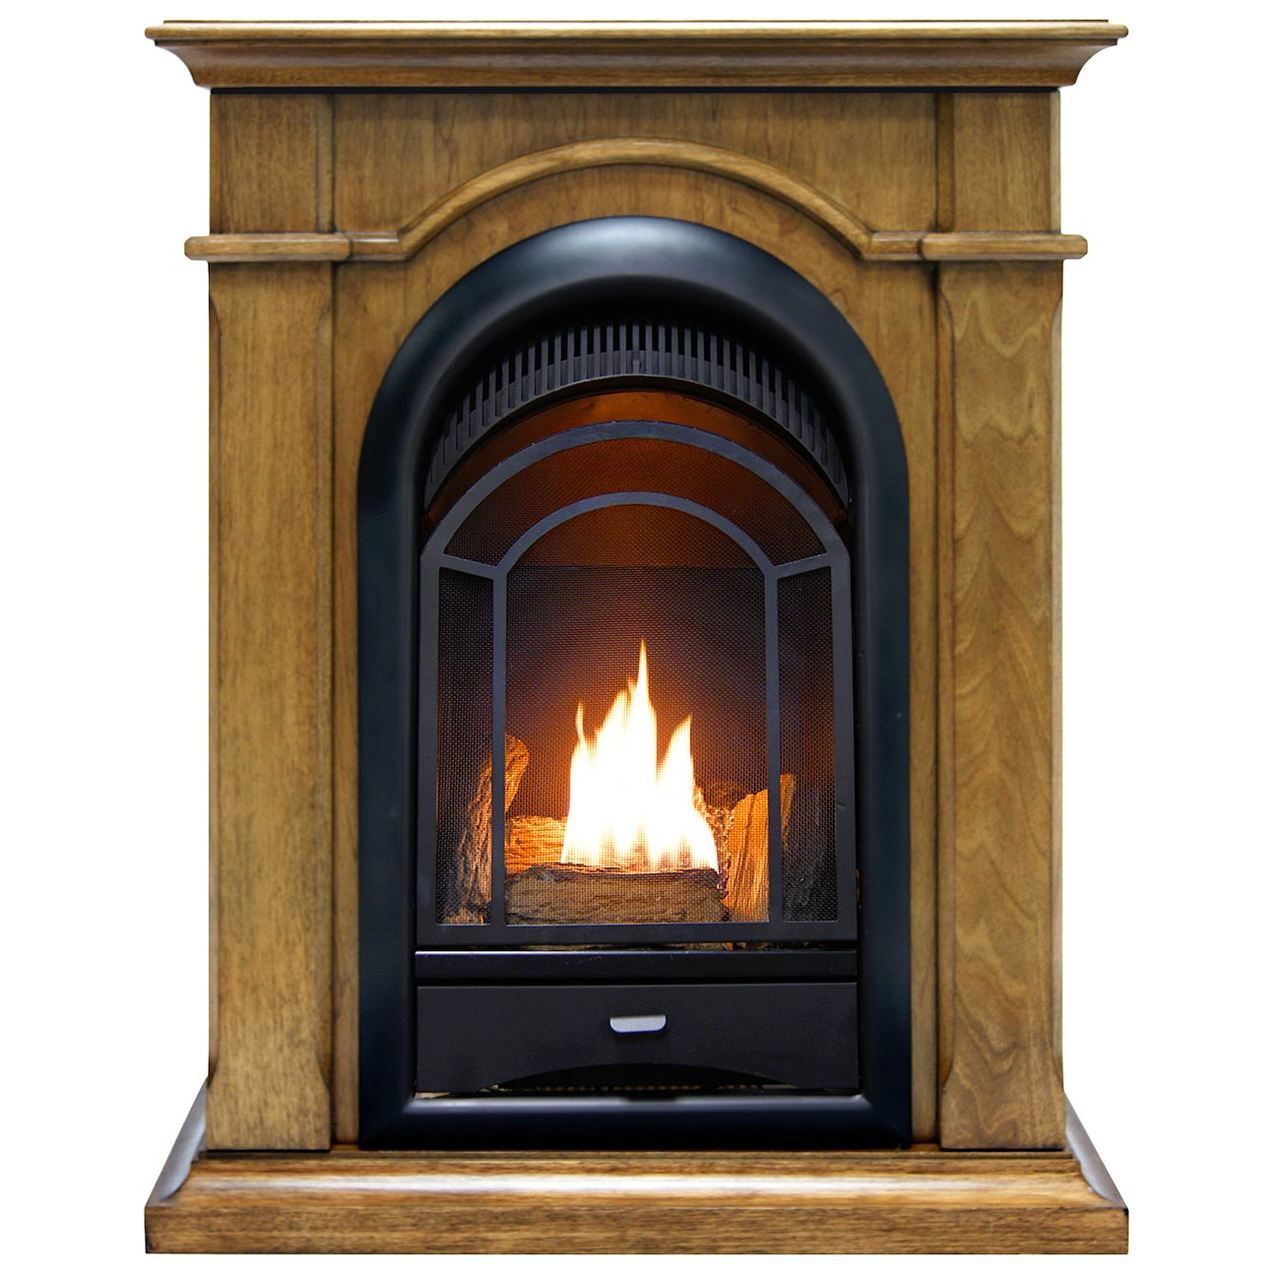 Fake Fireplaces for Sale Best Of Buy Pro Fs100t Ta Ventless Fireplace System 10k Btu Duel